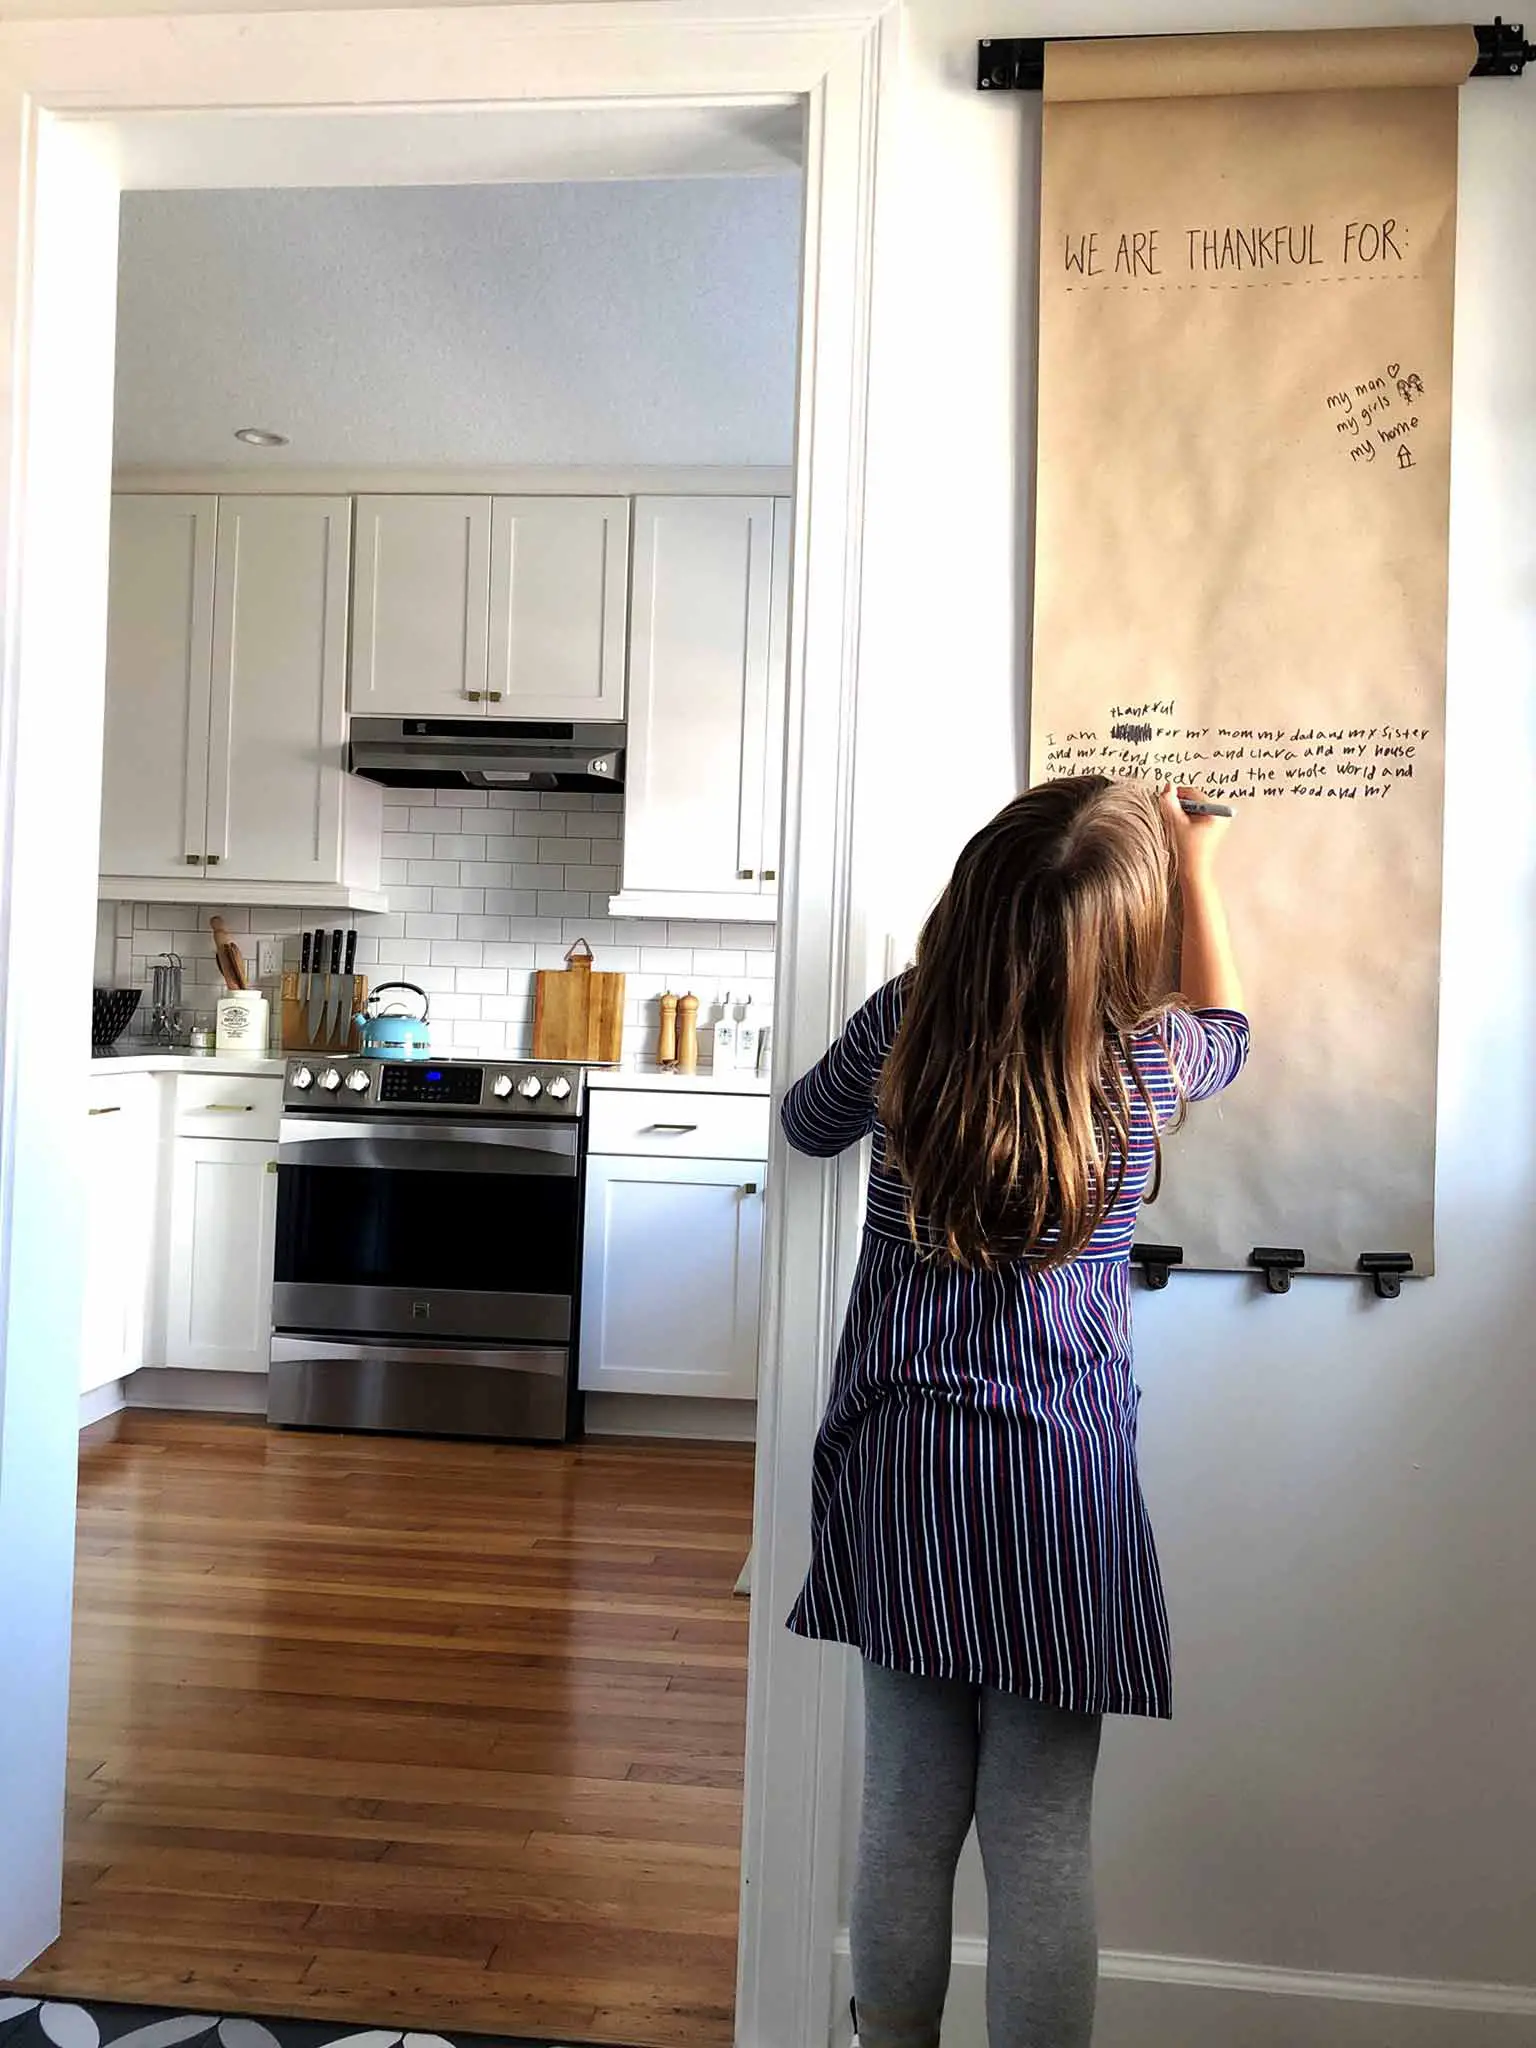 Kids using hanging note roll